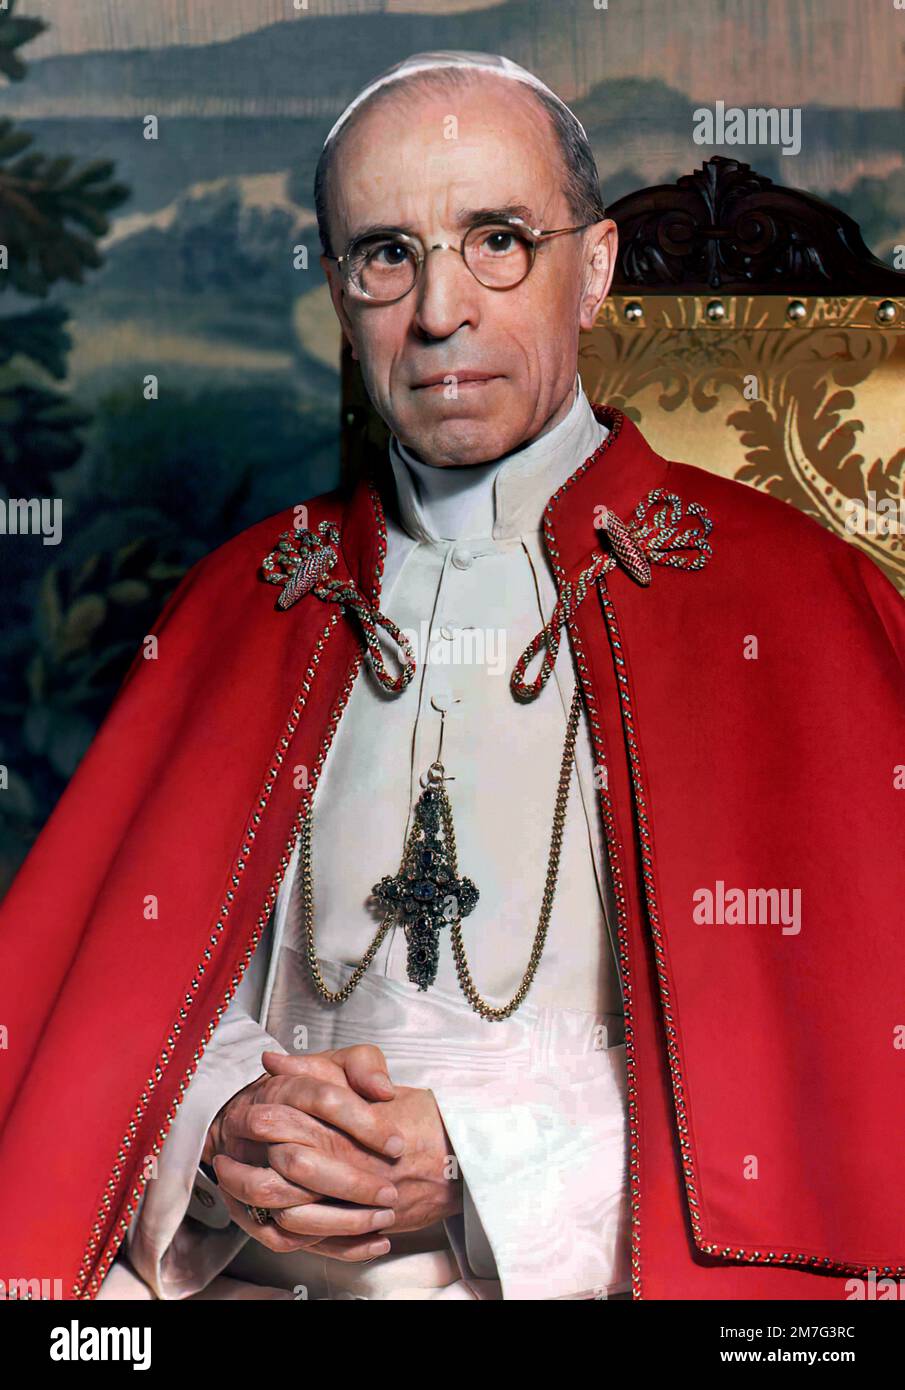 Pius XII. Portrait of the Italian Pope, Pius XII (b. Eugenio Maria Giuseppe Giovanni Pacelli, 1876-1958). Pius XII was pope from 1939 until his death in October 1958. Stock Photo